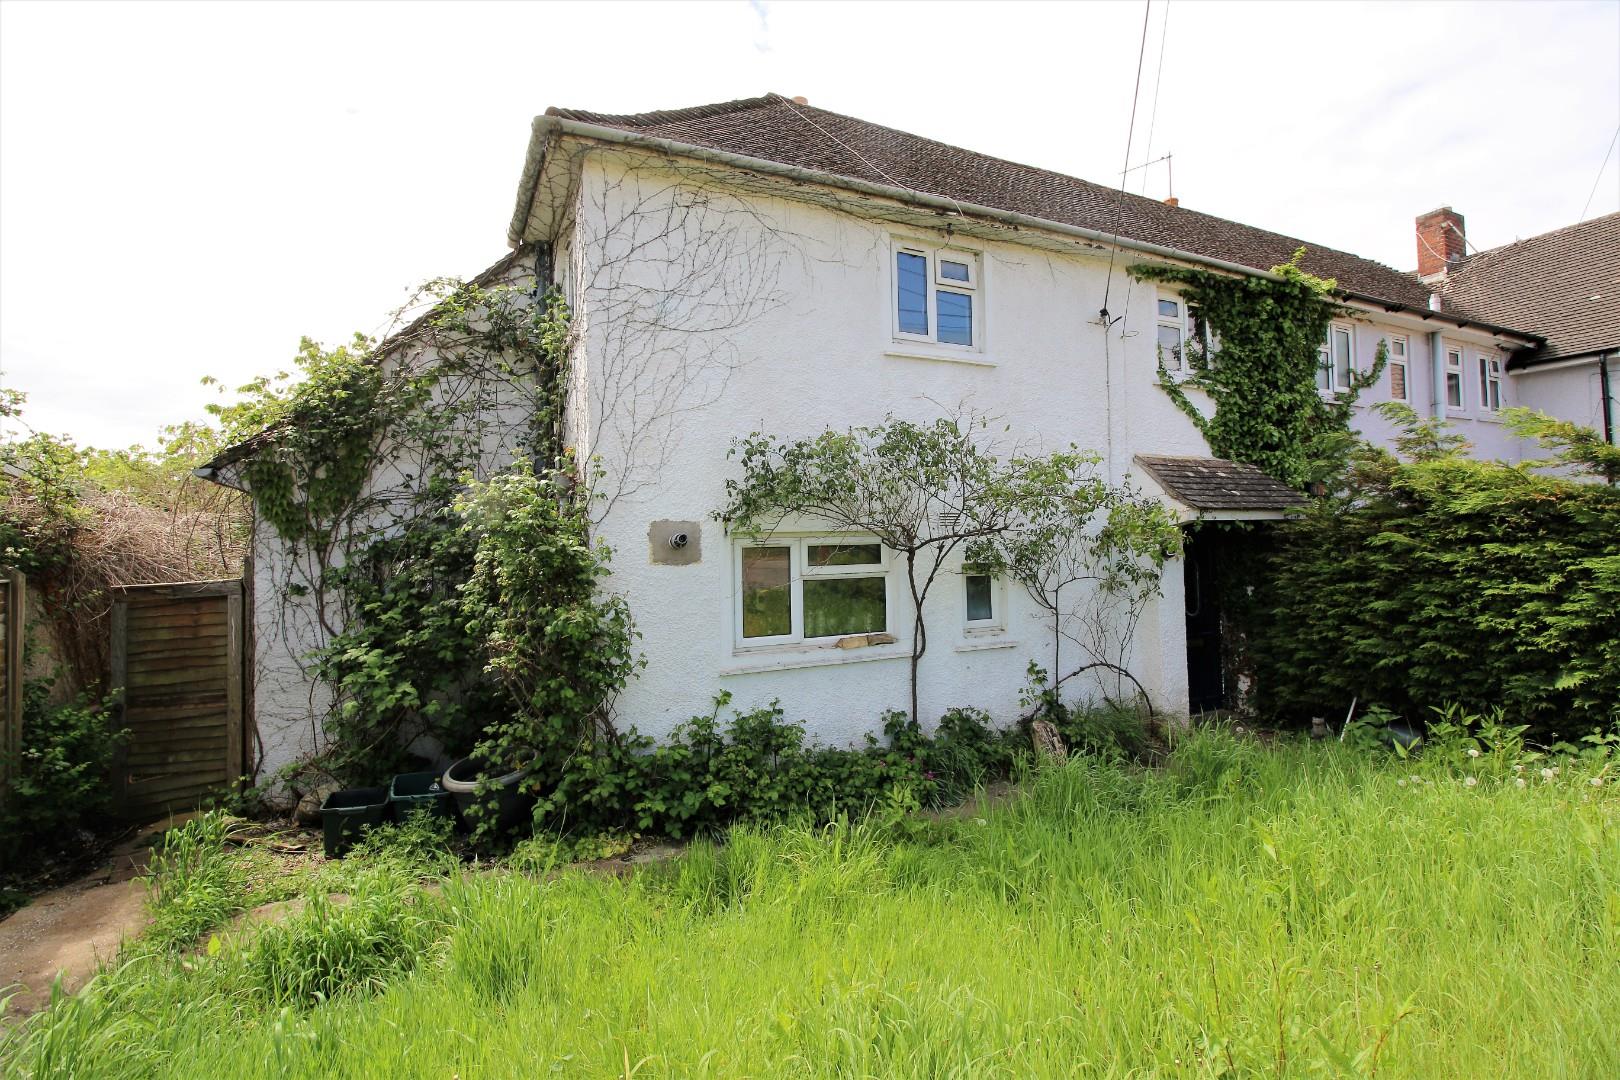 Semi detached house with building plot on the fringes of Congresbury